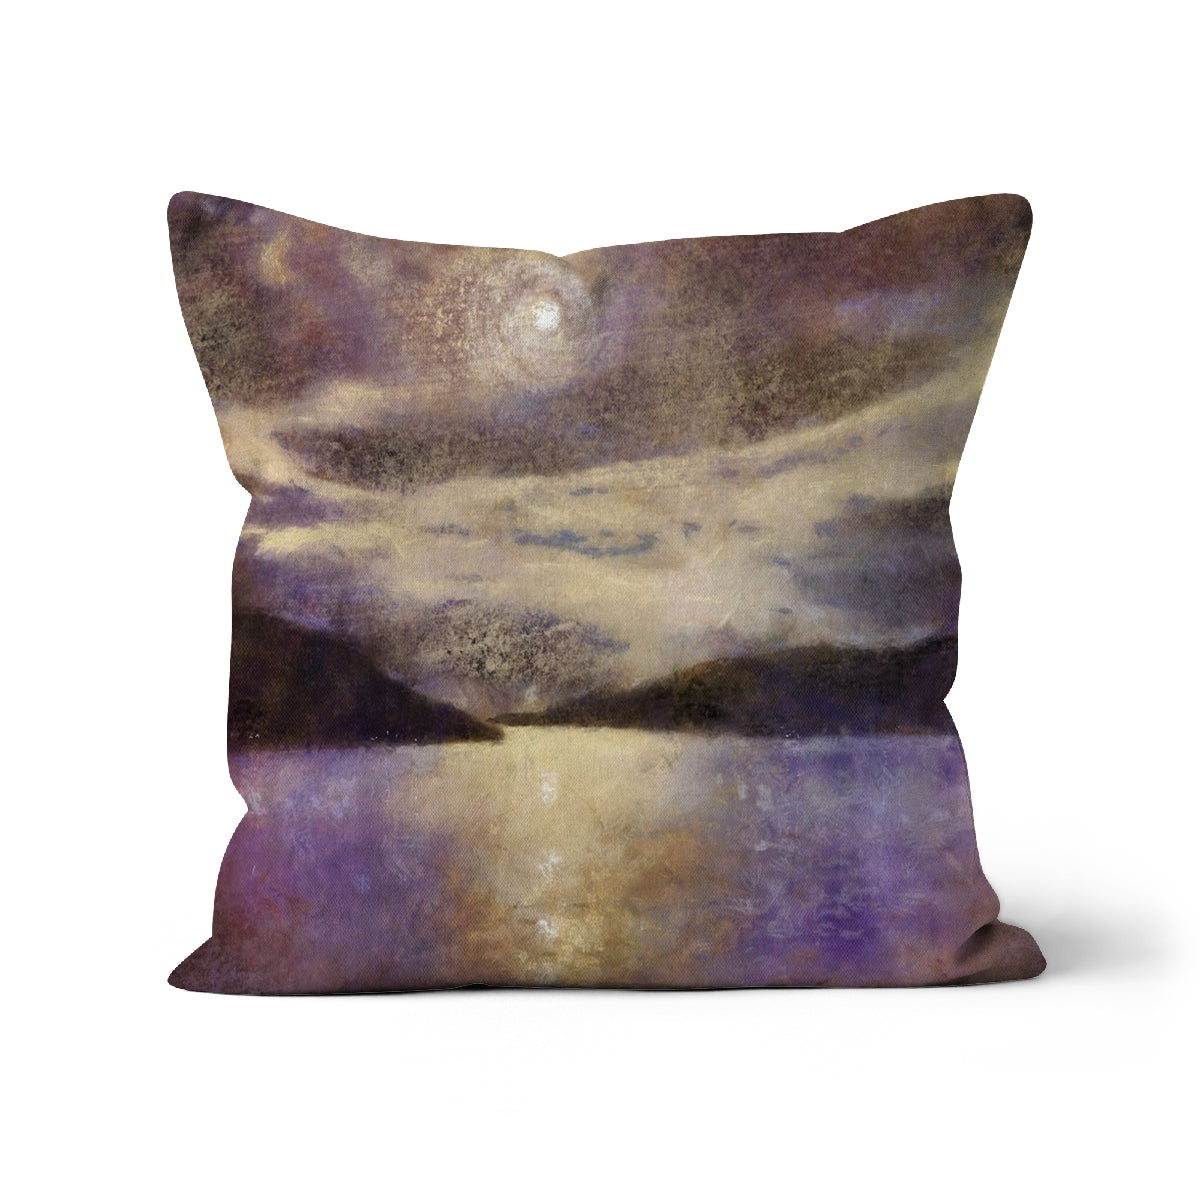 Moonlight Meets Lewis & Harris Art Gifts Cushion-Cushions-Hebridean Islands Art Gallery-Canvas-18"x18"-Paintings, Prints, Homeware, Art Gifts From Scotland By Scottish Artist Kevin Hunter